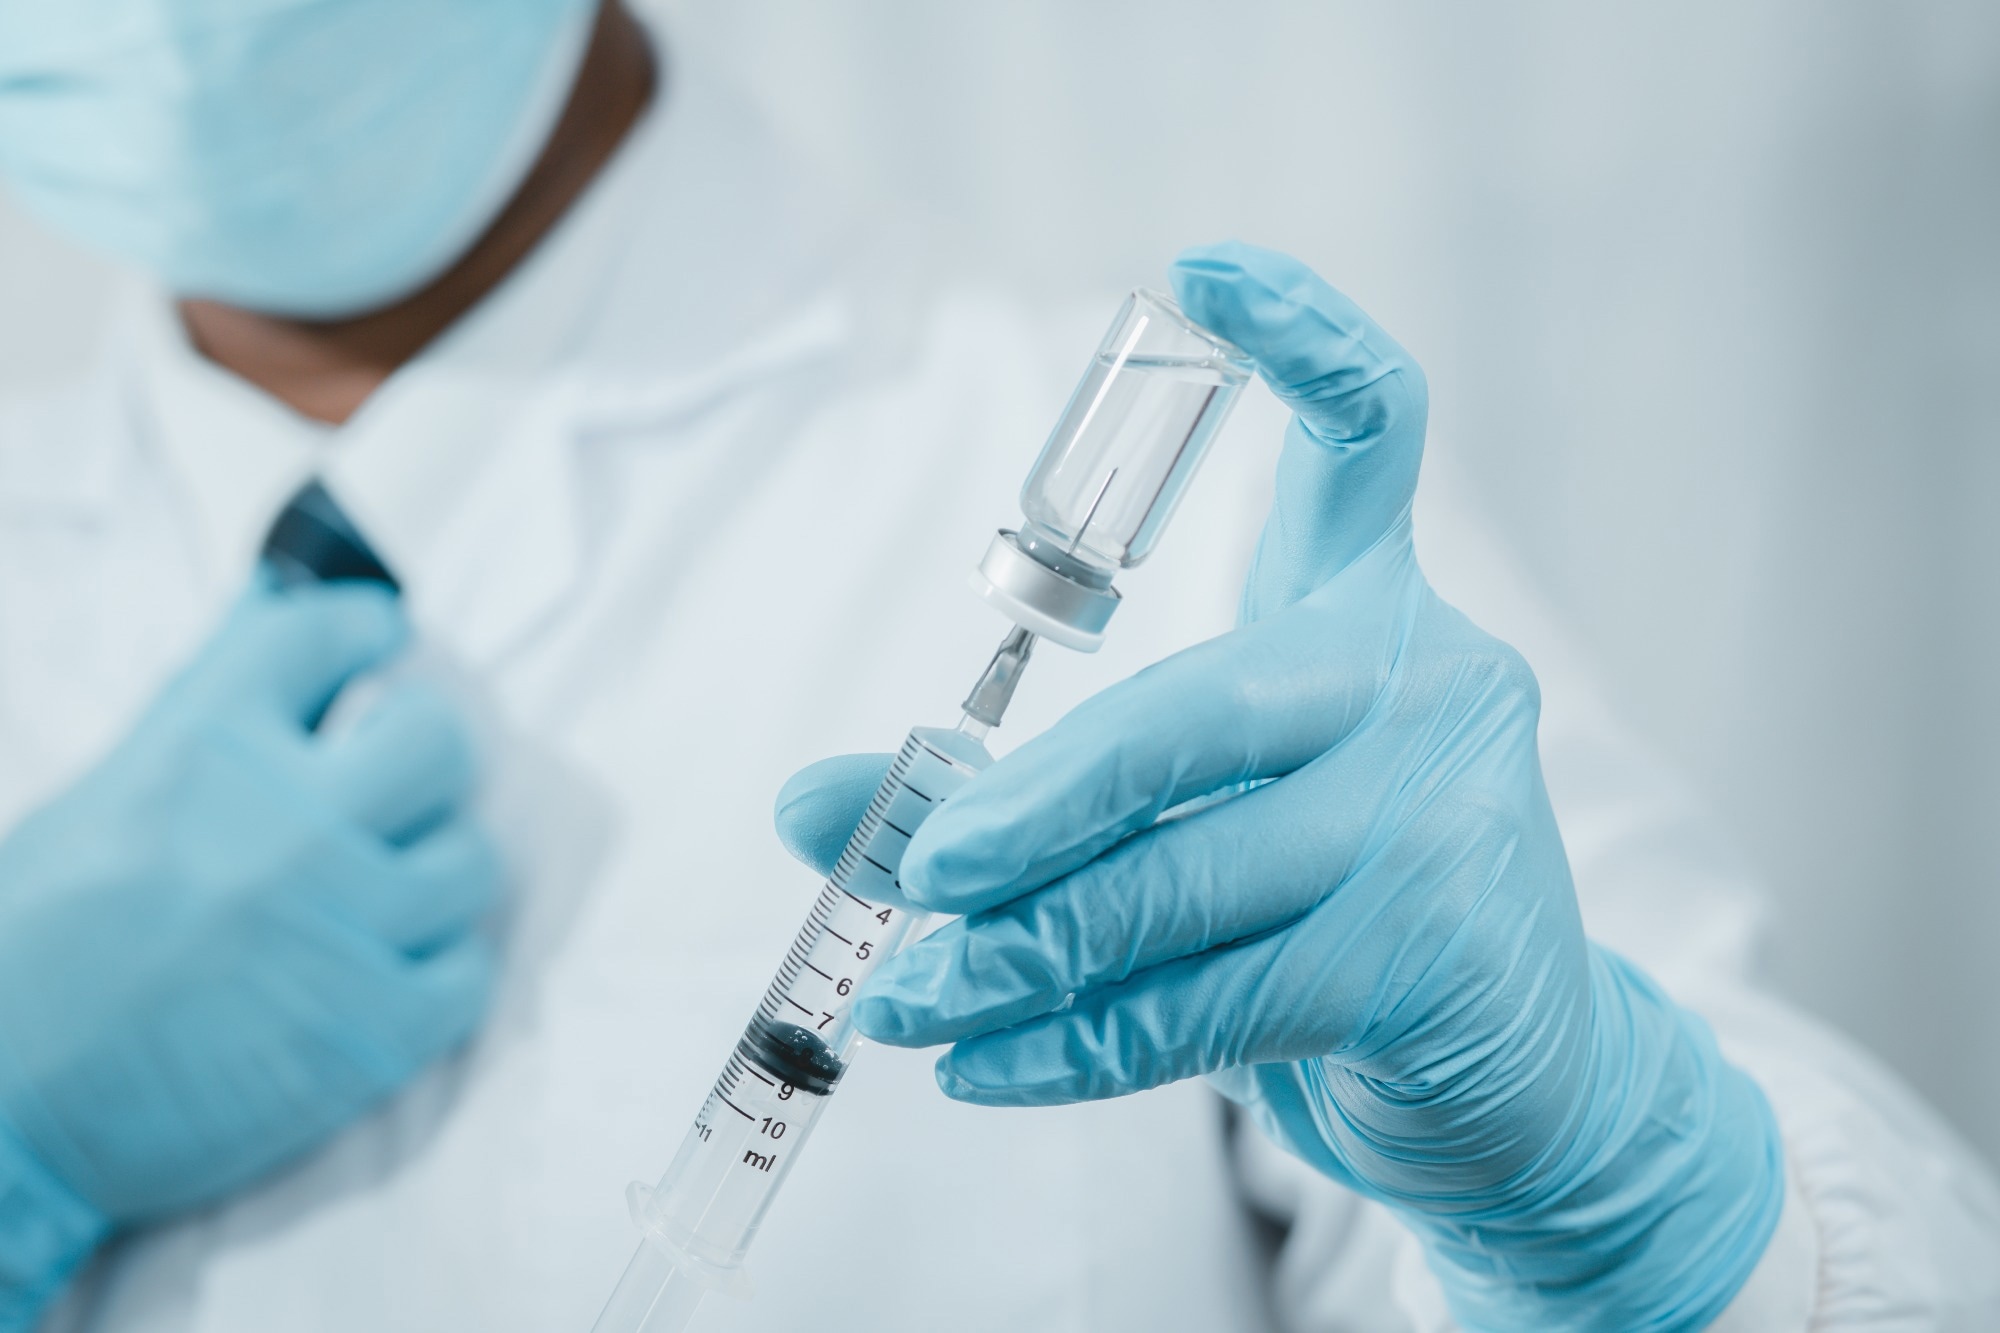 Study: Incidence of Severe COVID-19 Illness Following Vaccination and Booster With BNT162b2, mRNA-1273, and Ad26.COV2.S Vaccines. Image Credit: Treecha/Shutterstock